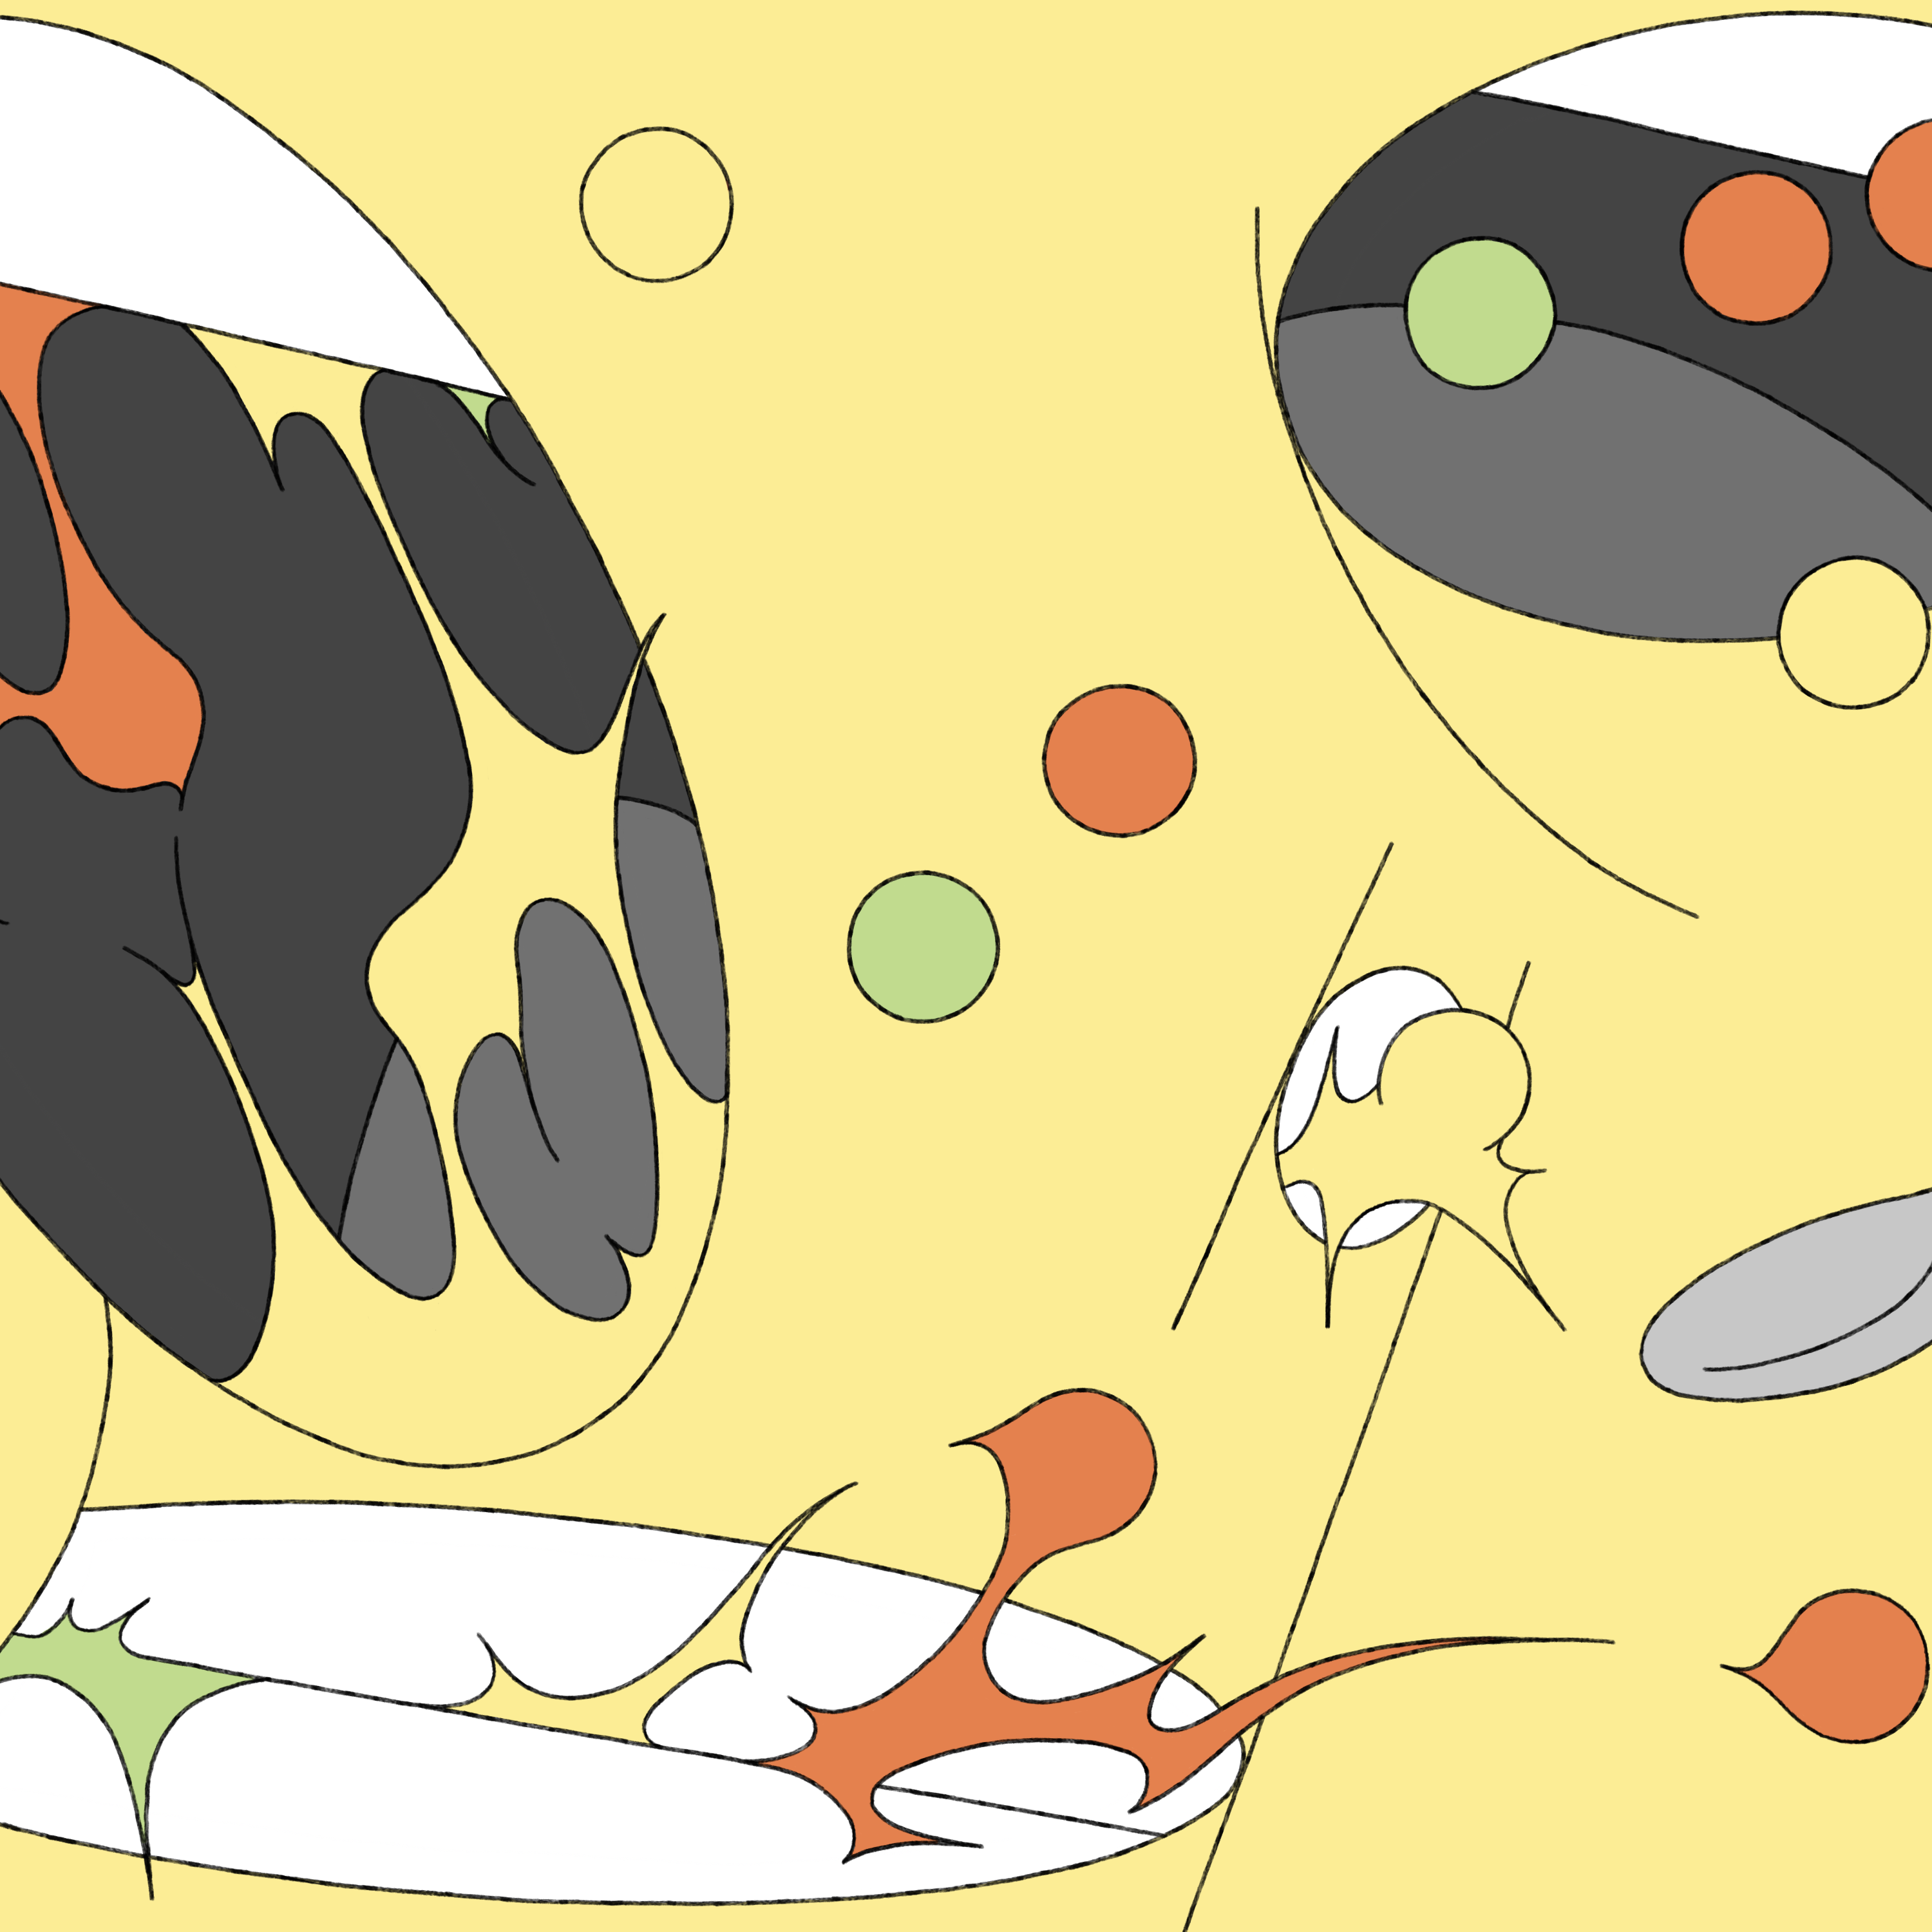 A close up of three cartoon mouths on a yellow background. A spoon feeds them multi-coloured dots food. They are chewing the dots with their mouths open.